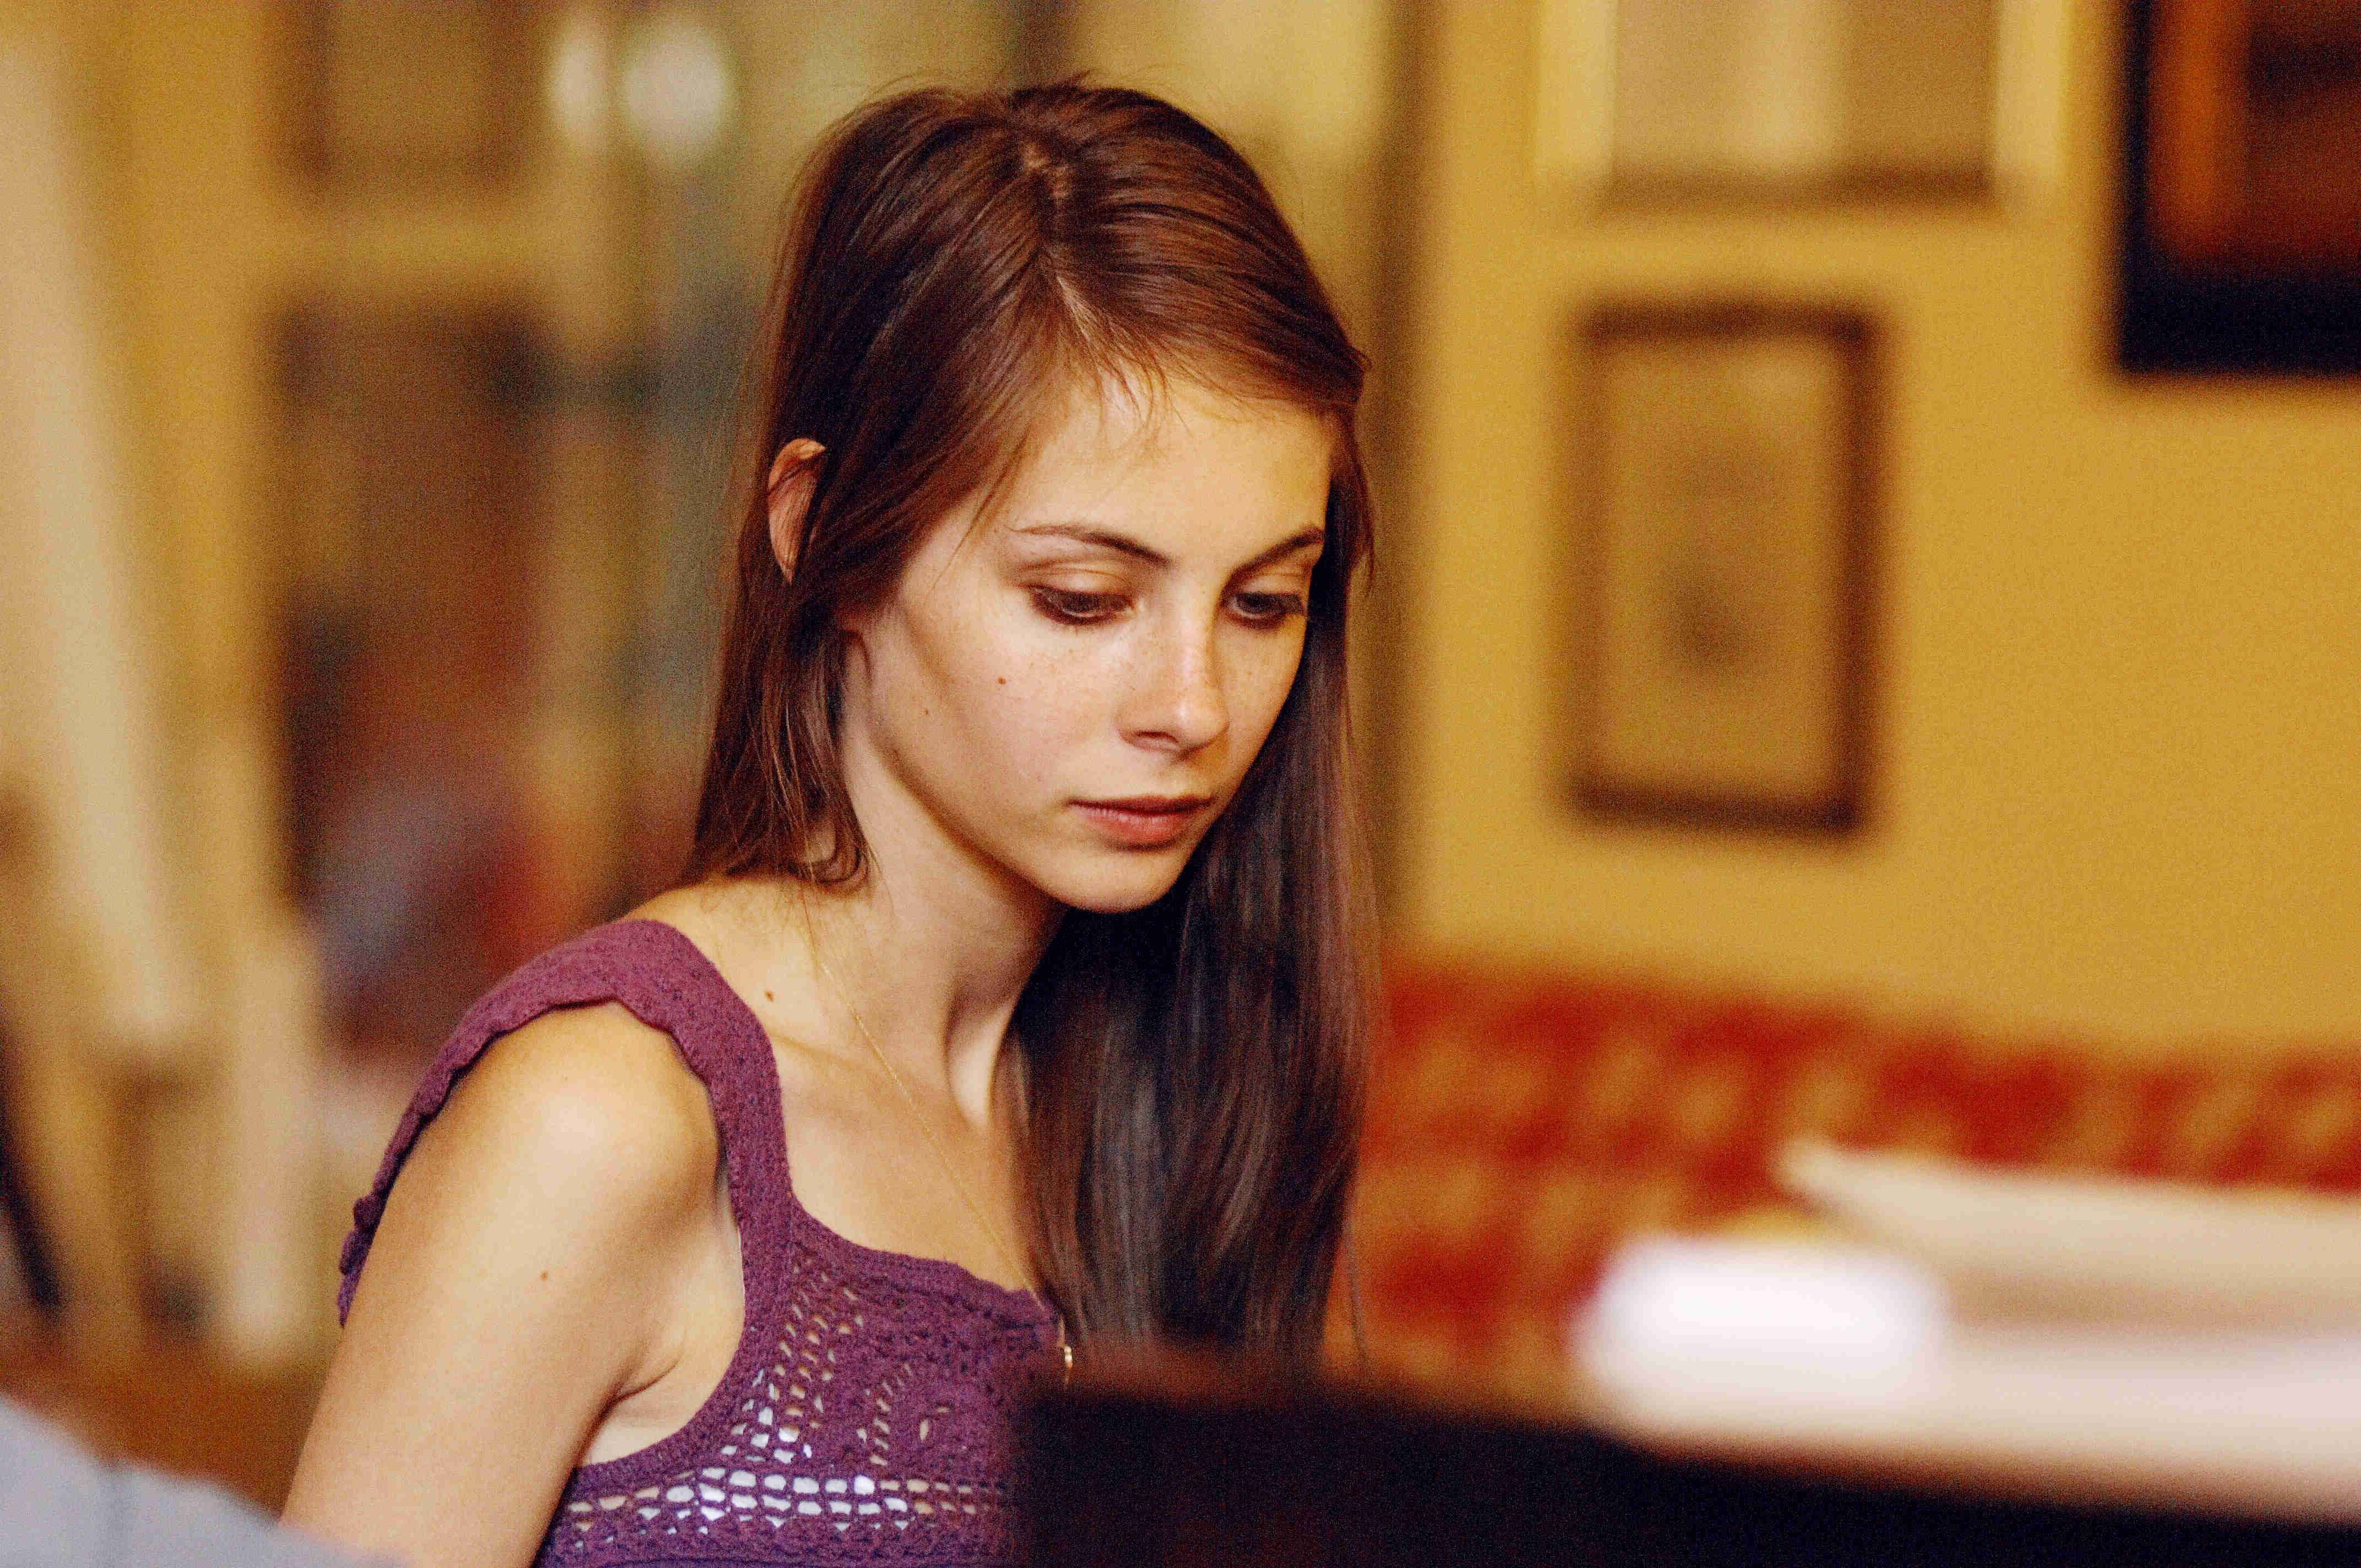 Willa Holland stars as Kelly in E1 Entertainment's Summer in Genoa, A (2009)